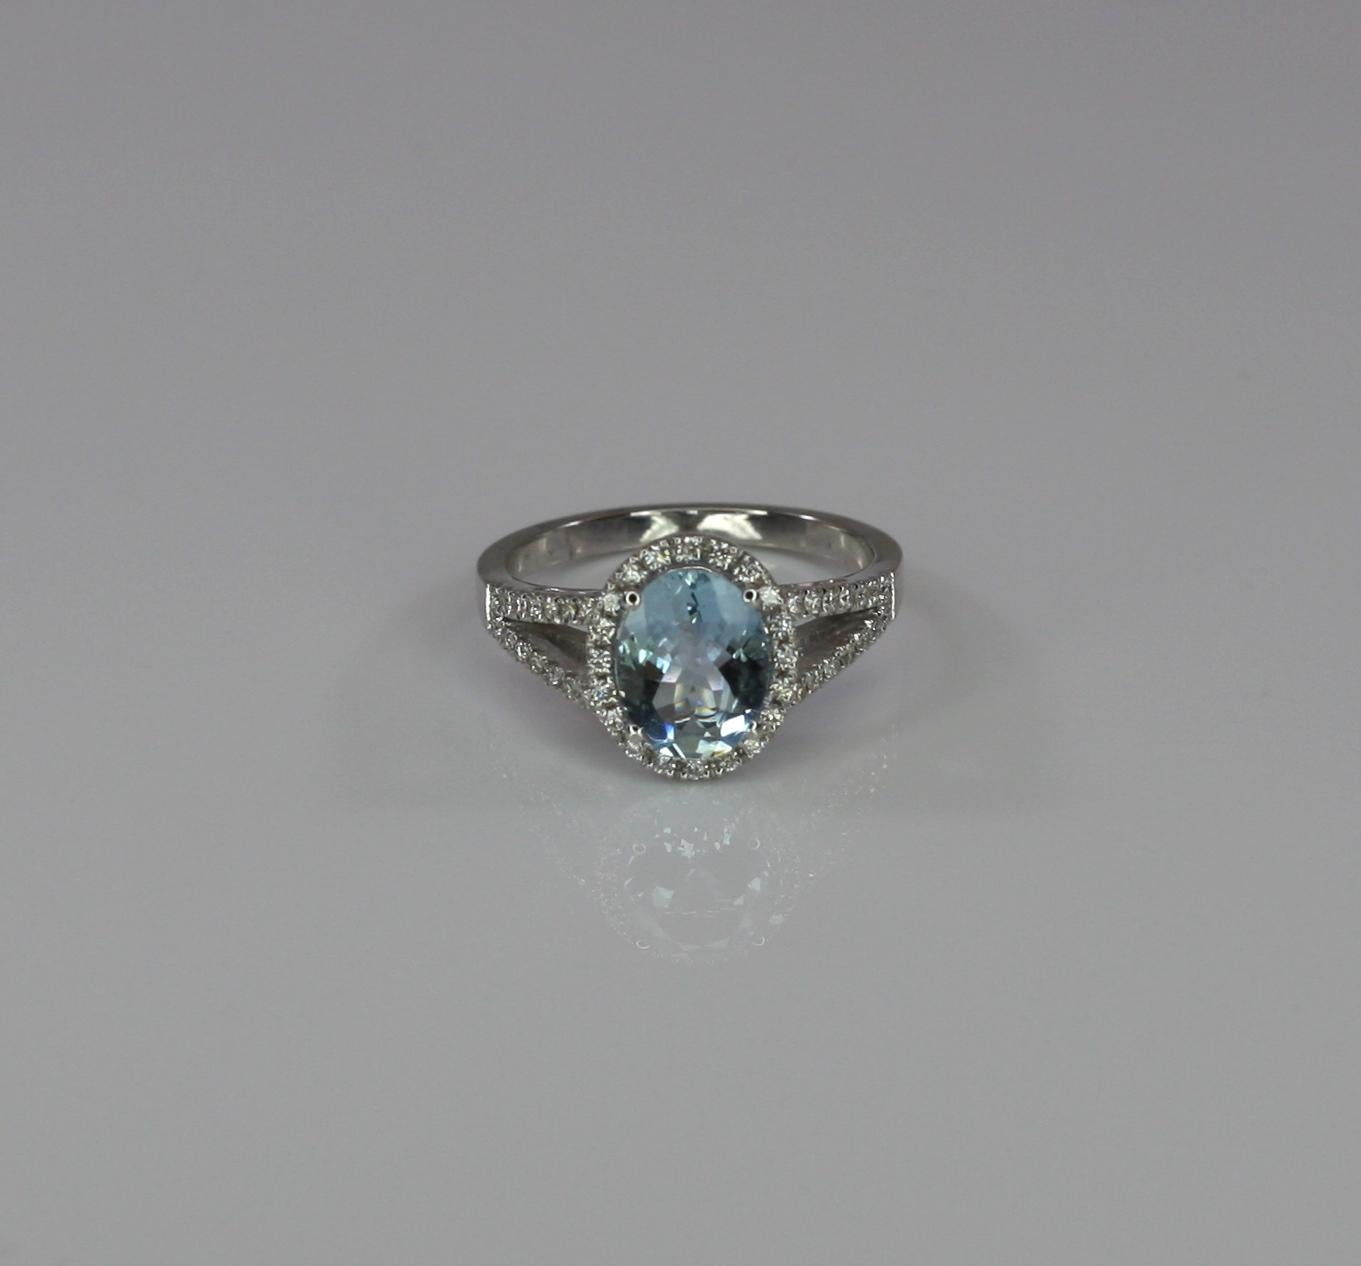 This is a gorgeous Aquamarine rosette ring from S.Georgios designs. The stunning ring was handmade from 18 Karat White gold in Athens Greece and features 1.46 Carat Aquamarine in oval cut, accompanied by Brilliant-cut White Diamonds total weight of